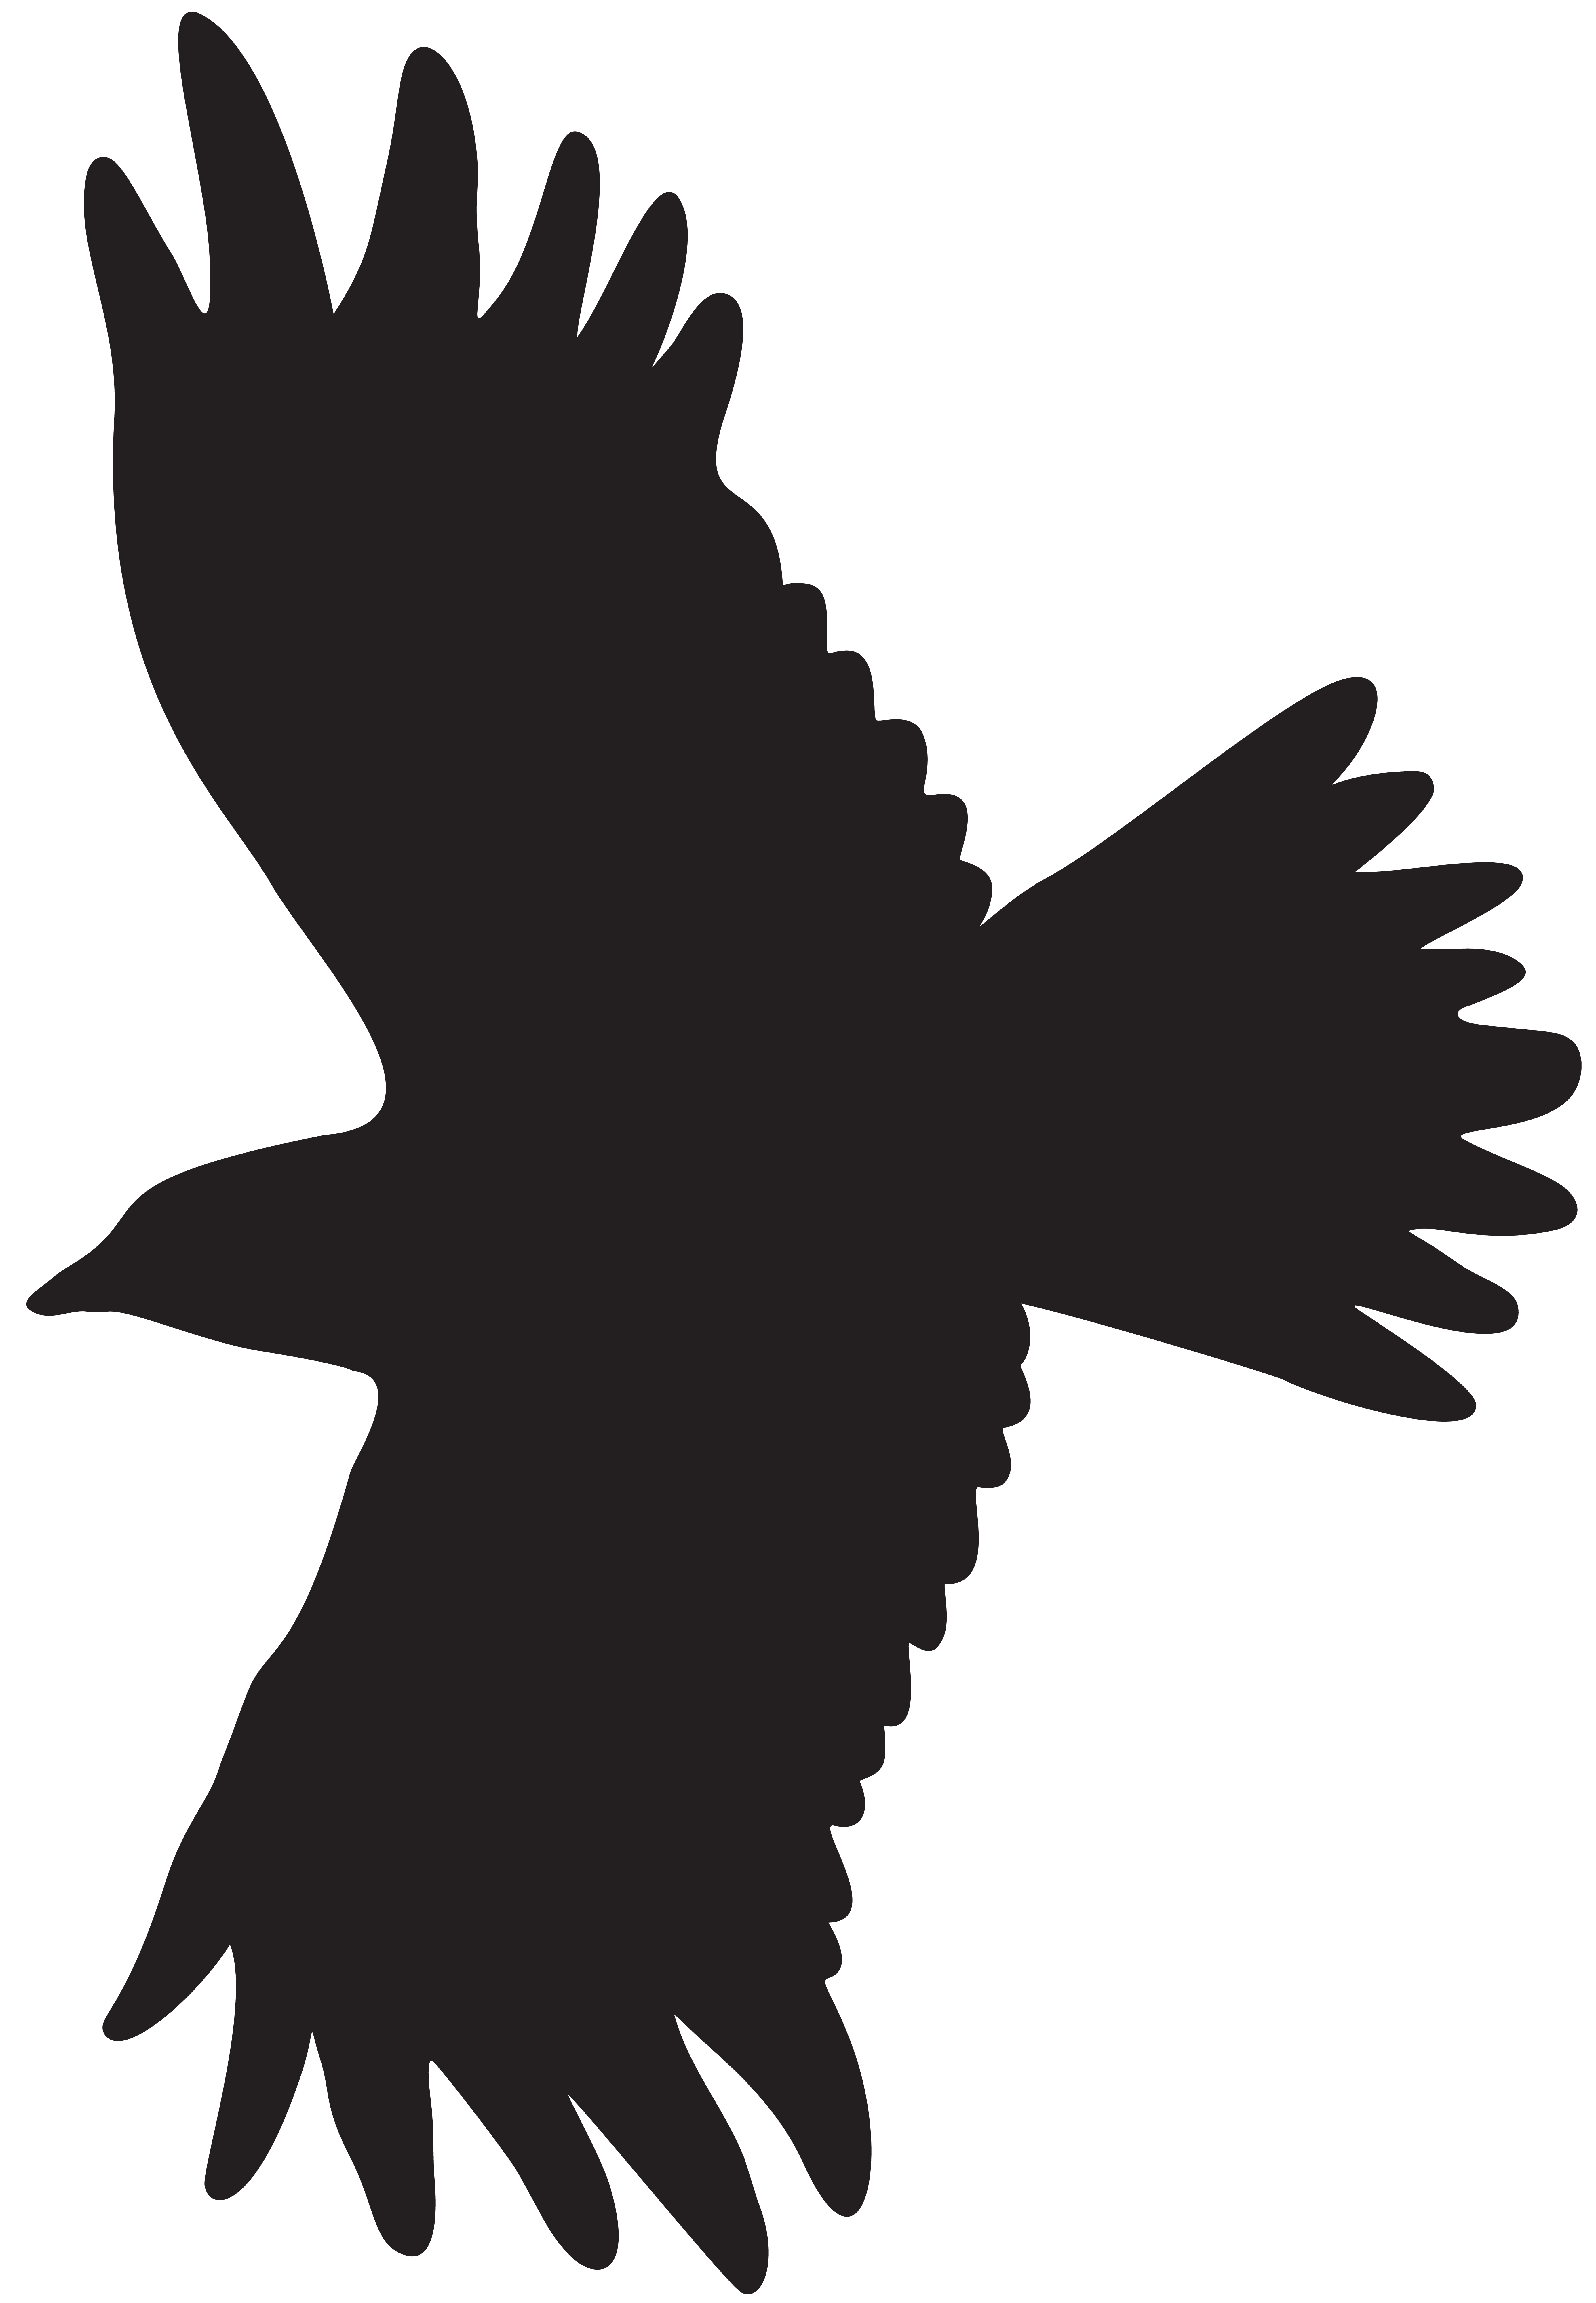 flying bird clipart png